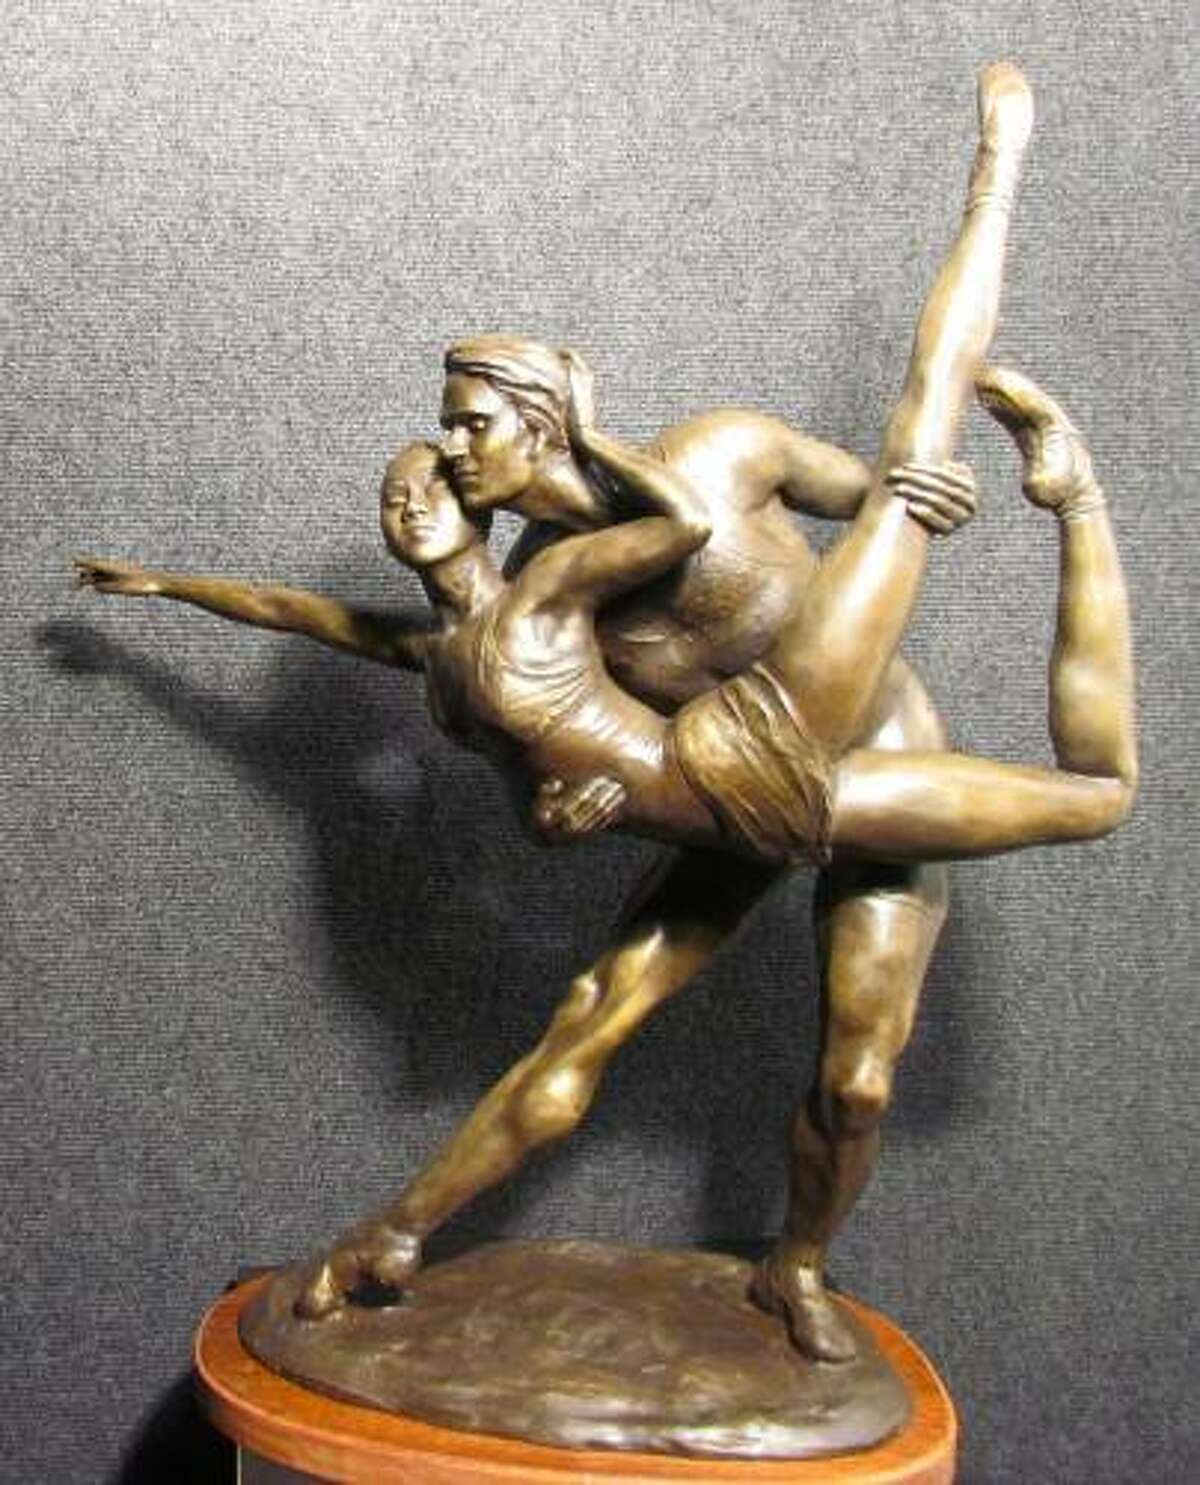 A bronze sculpture titled "Peter and Nao" by Houston sculptor Lori Betz, and is a sample of the work she will be displaying at the April 20 Grand Opening of the Glade Cultural Center in The Woodlands.   